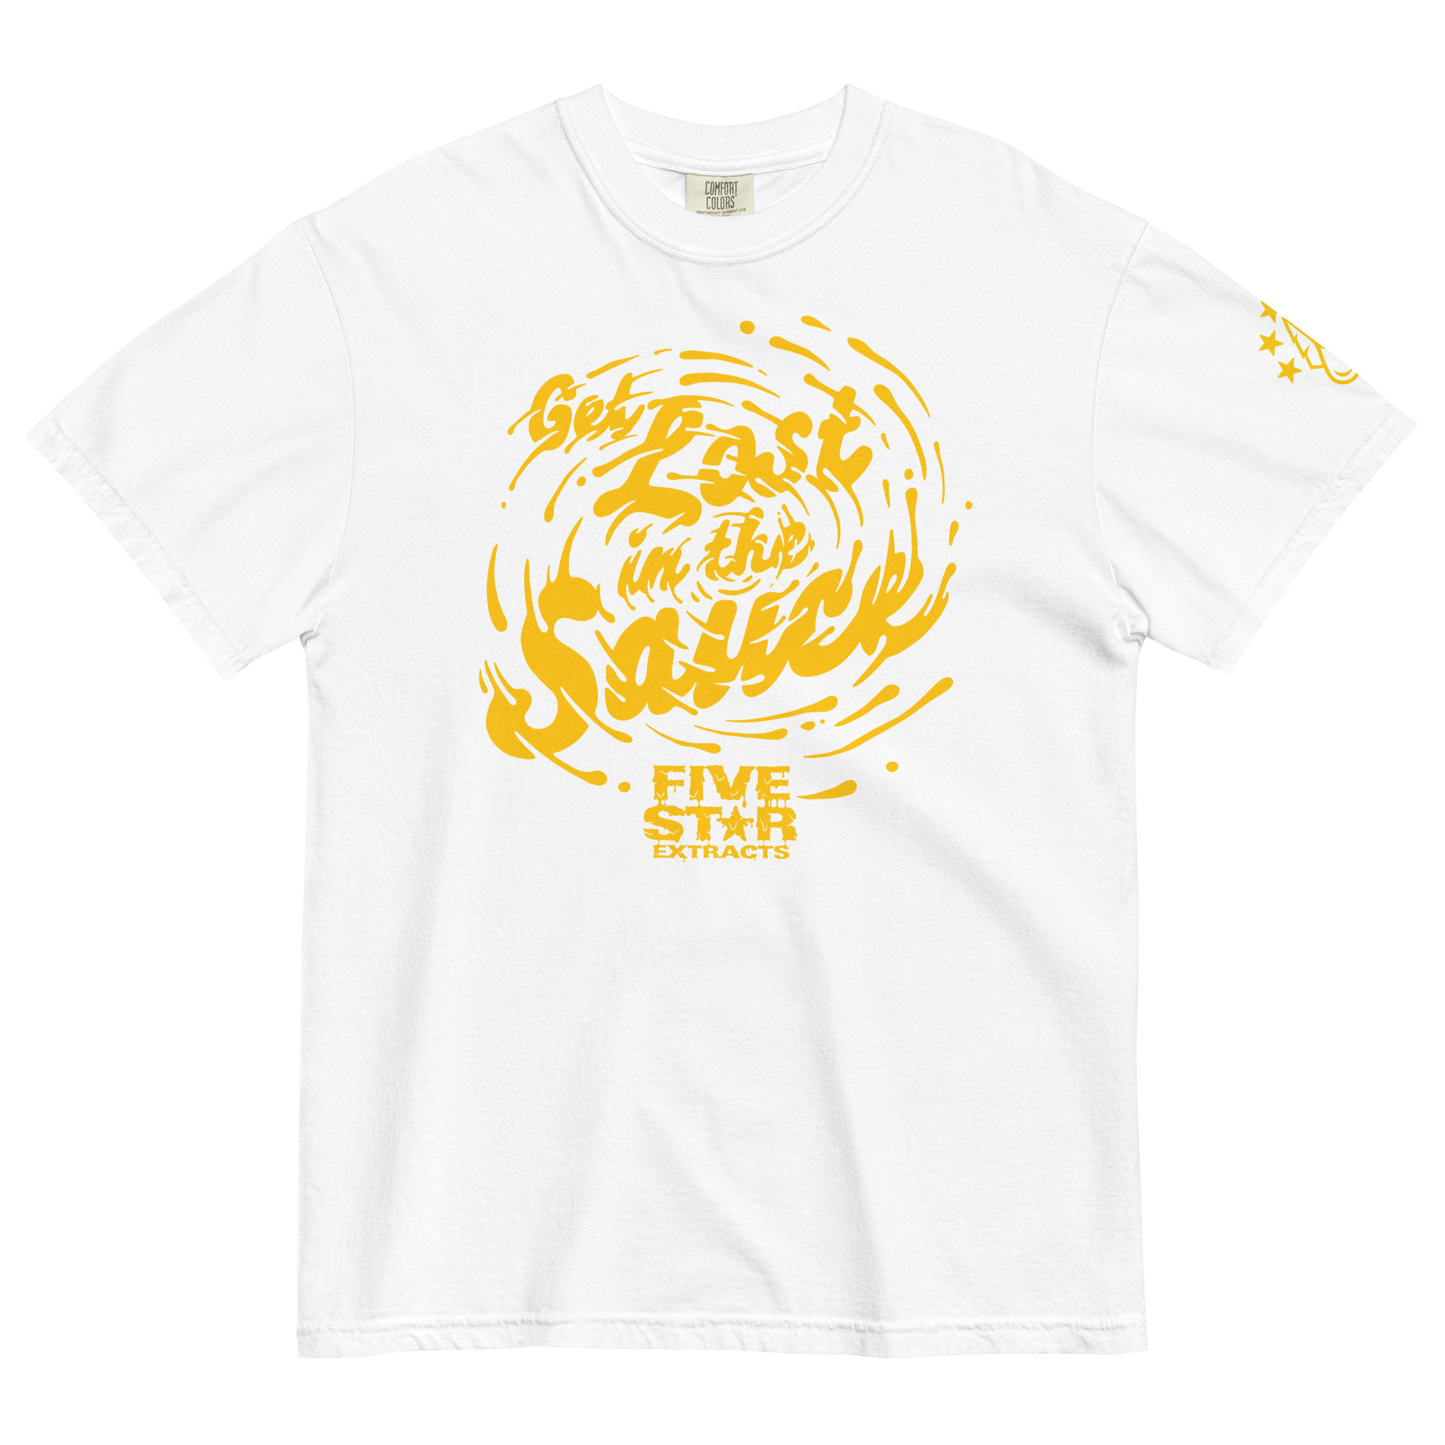 Get Lost in the Sauce Five Star Extracts Tee